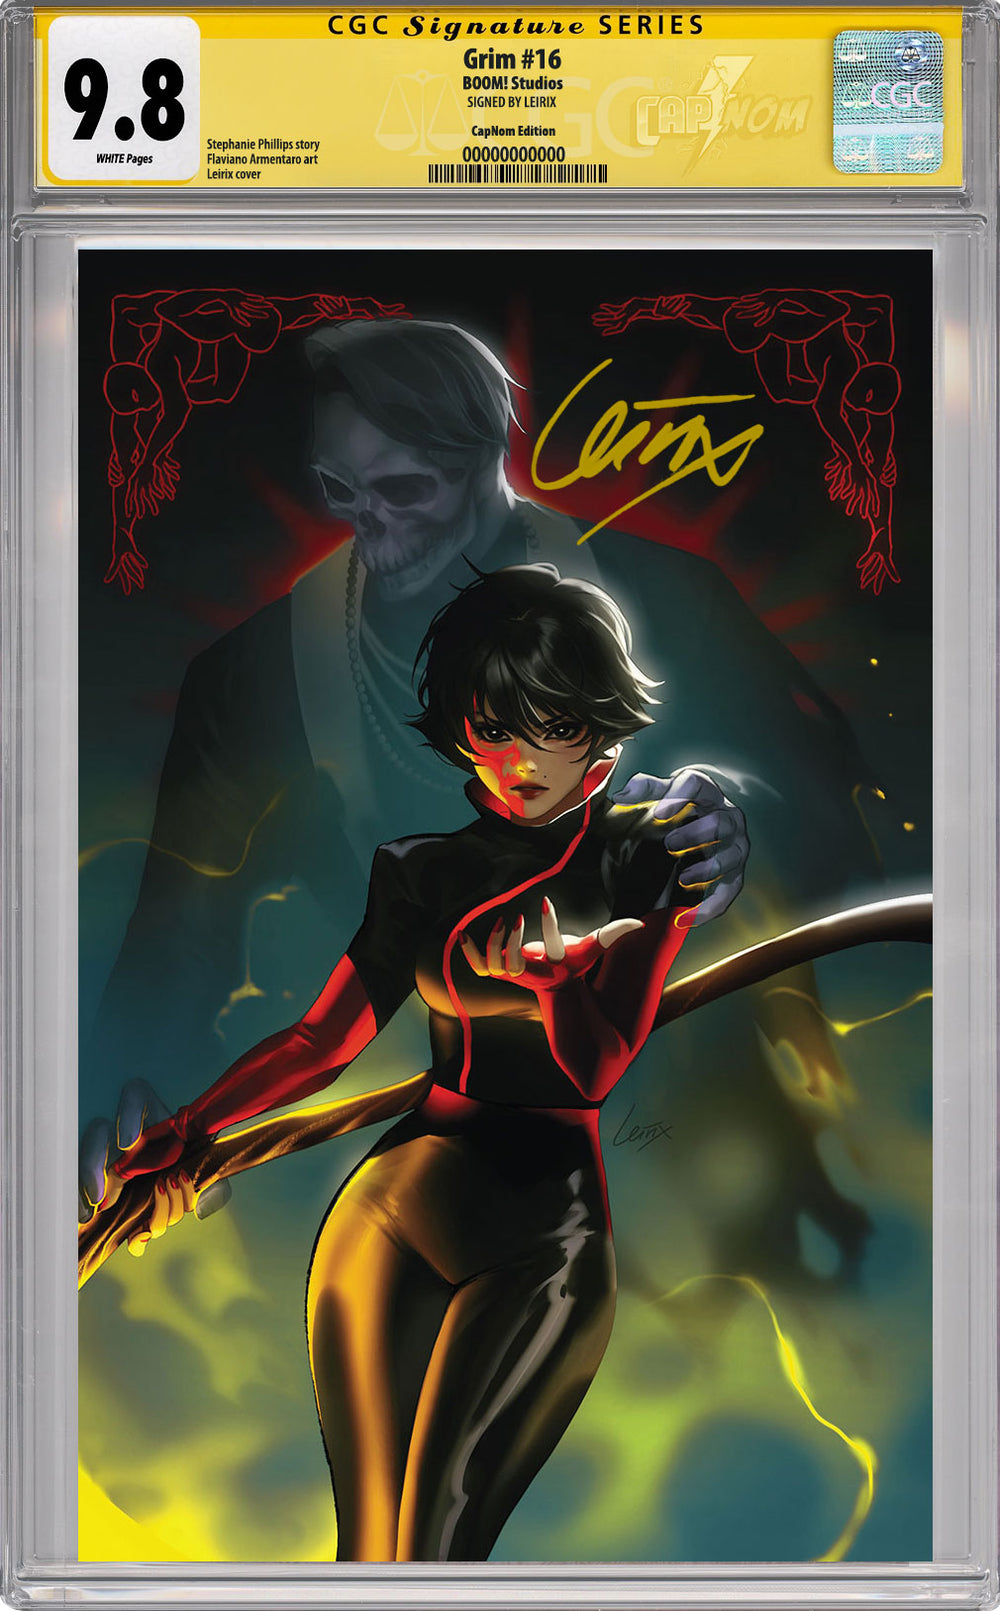 GRIM #16 “THE DEATH TOUCH” C2E2 EXCLUSIVE CGC 9.8 SIGNED BY LEIRIX